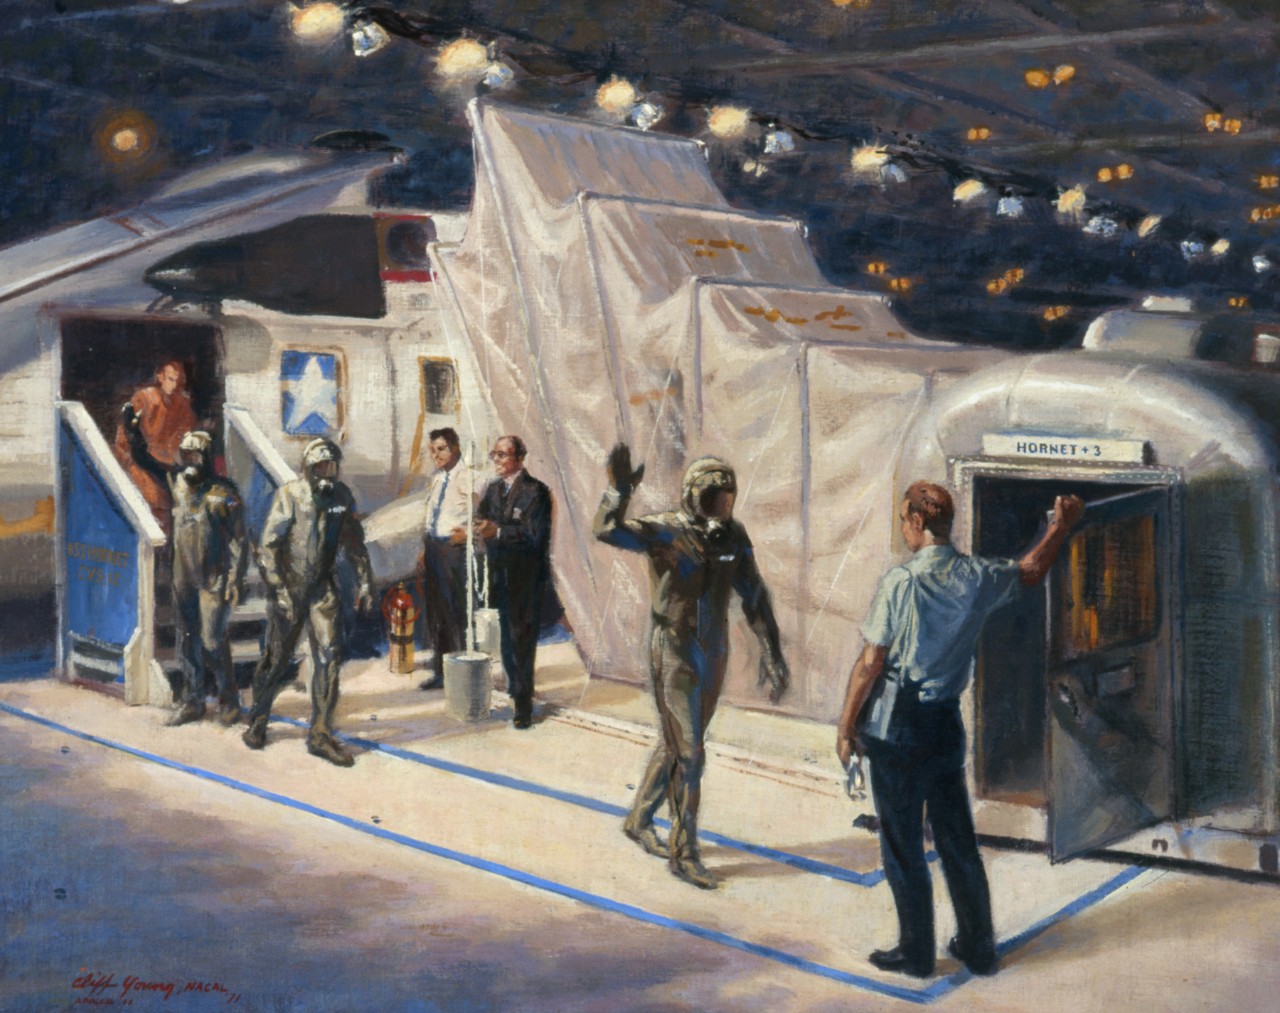 The astronauts heading to a decontamination chamber